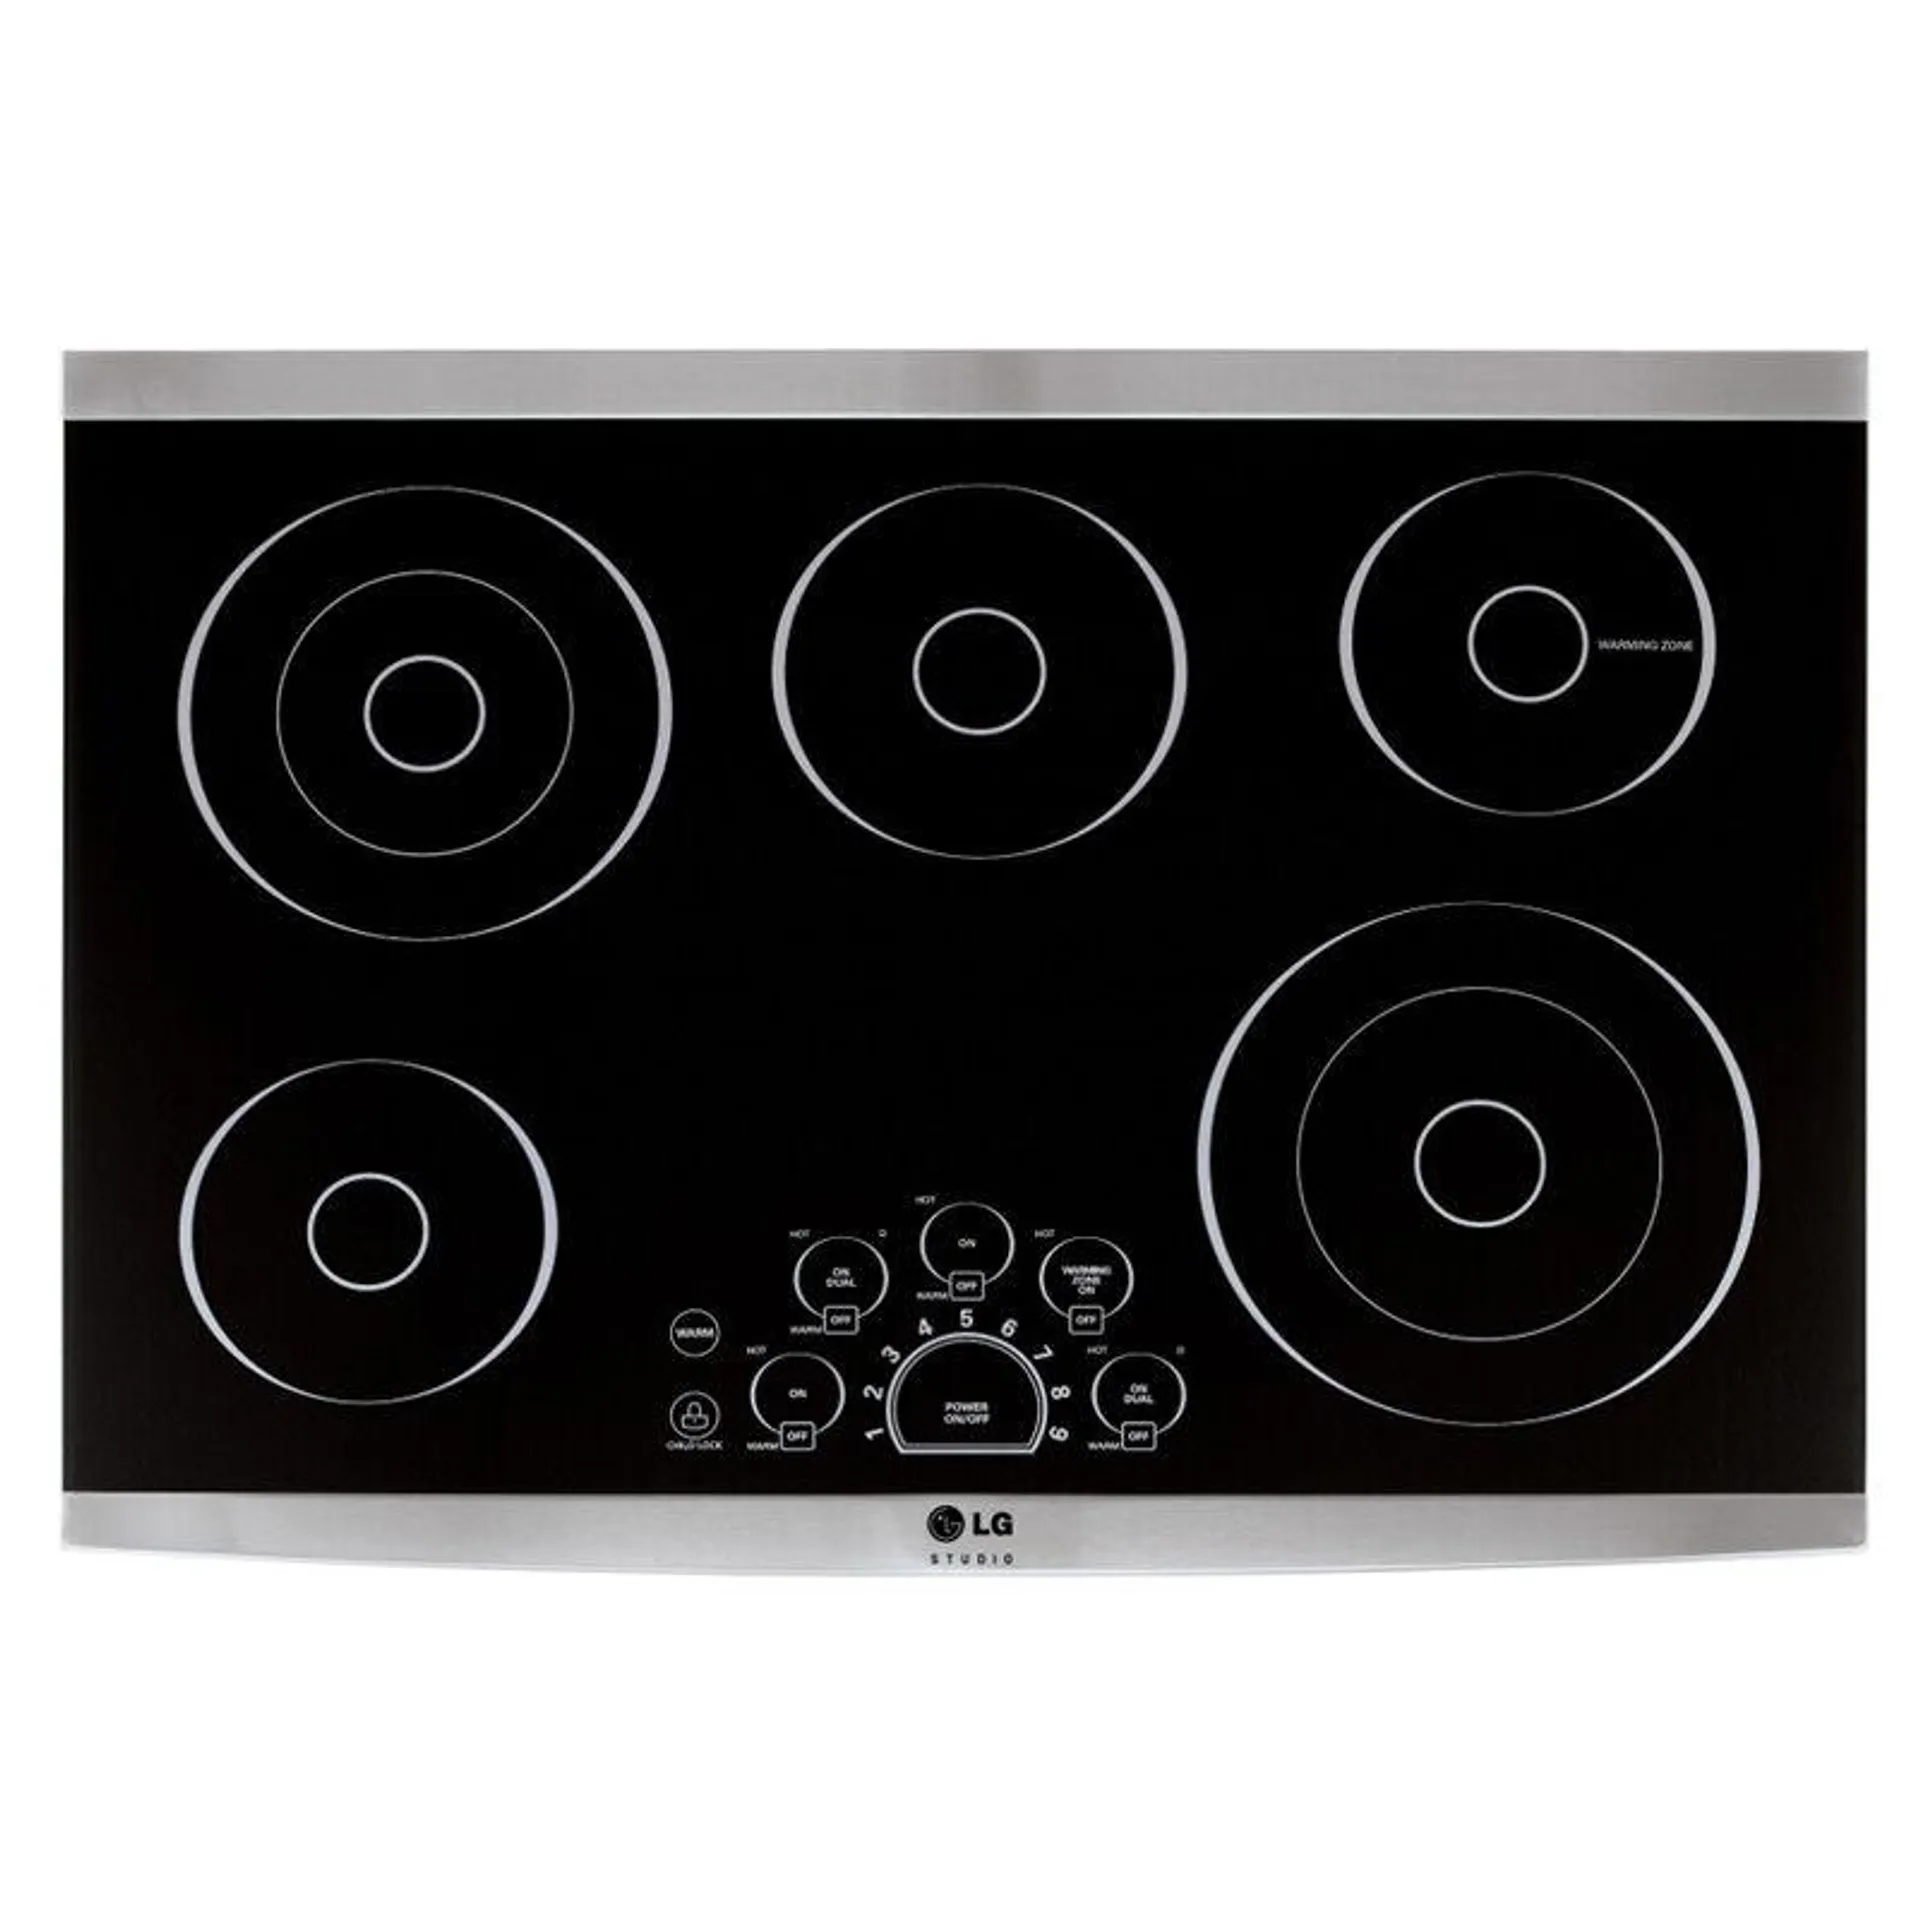 LG Studio 30 in. Electric Cooktop with 5 Smoothtop Burners - Stainless Steel